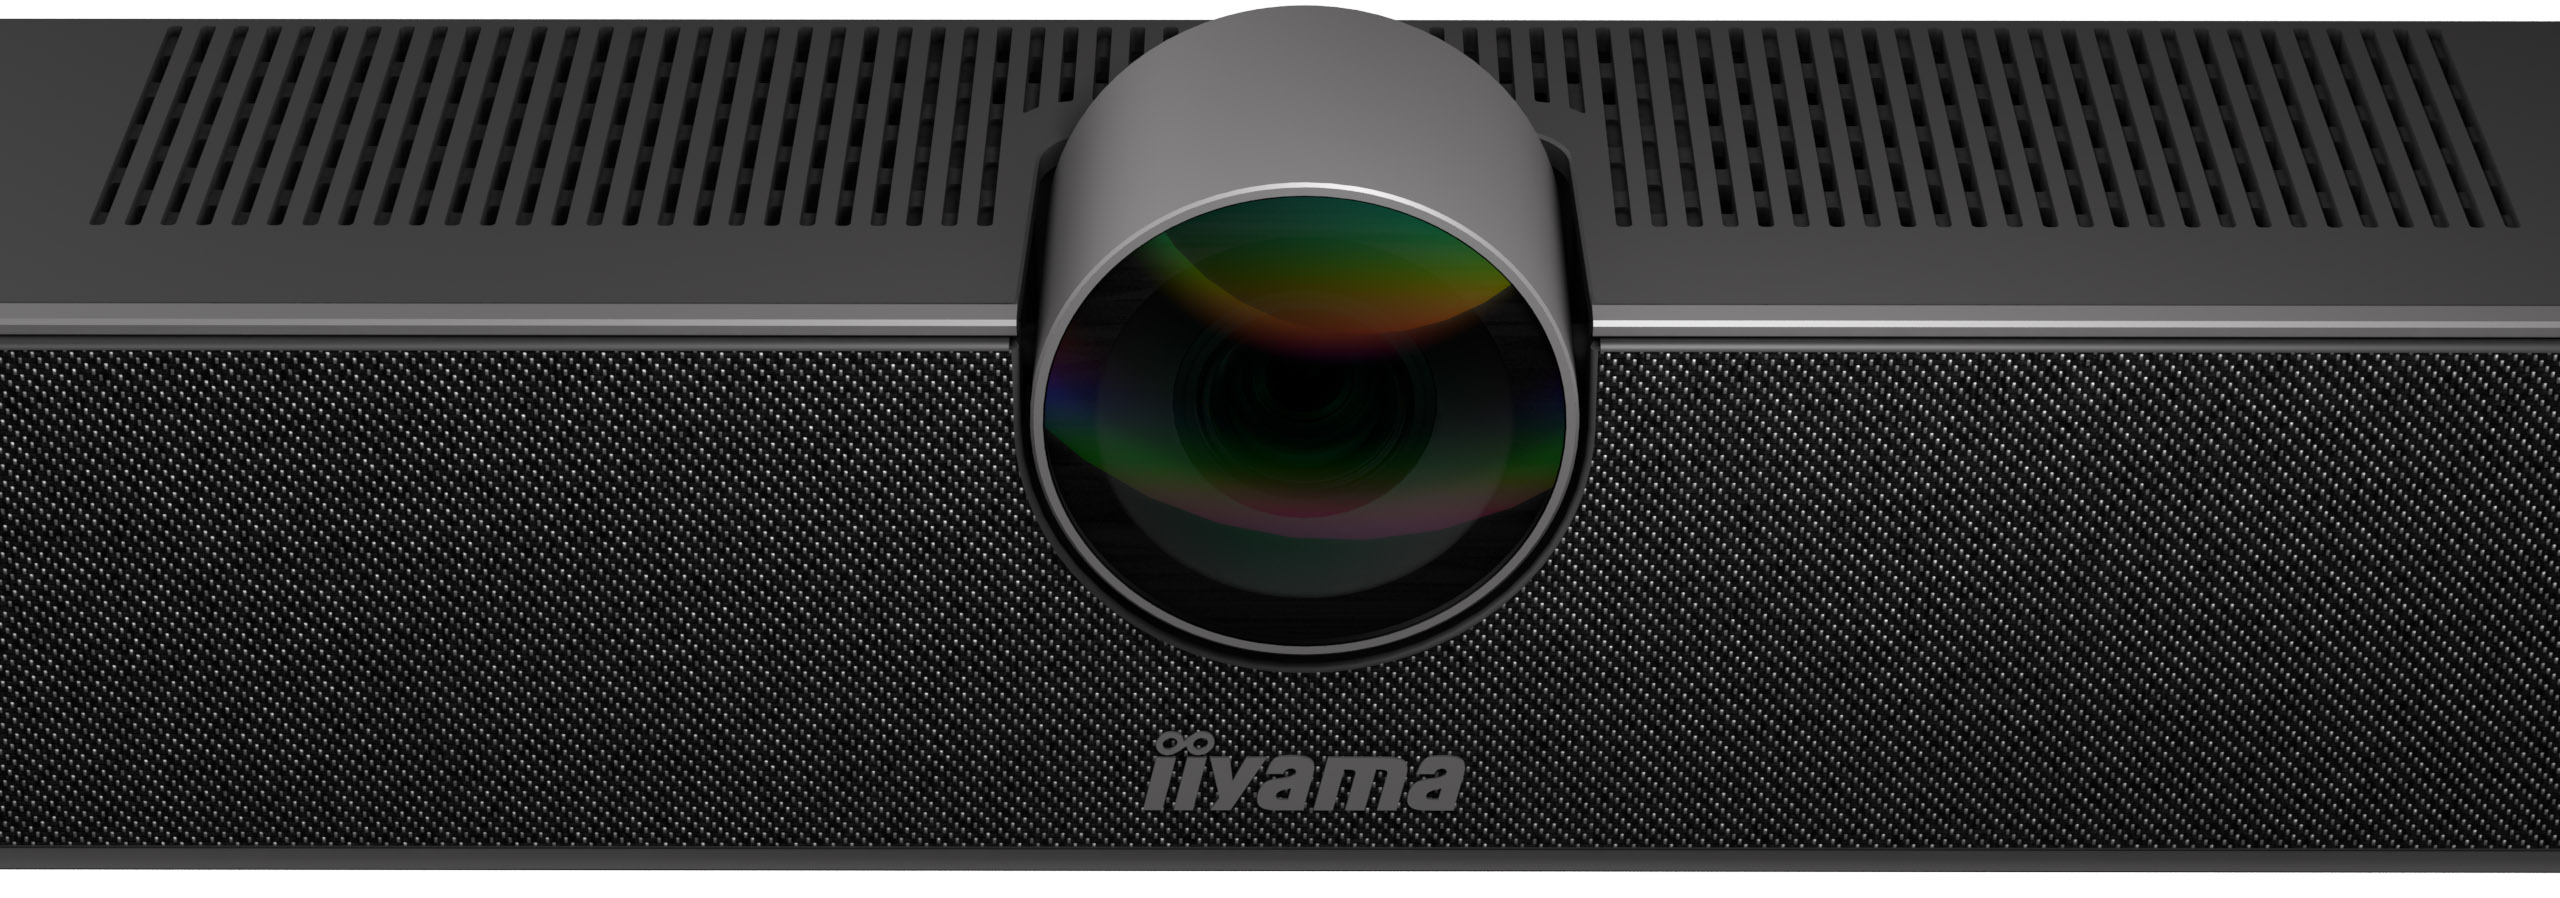 iiyama UC CAM120ULB-1 - All-in-one video bar - 12MP - USB - microphone - speaker - 120° field of view - auto-framing - small and medium sized rooms